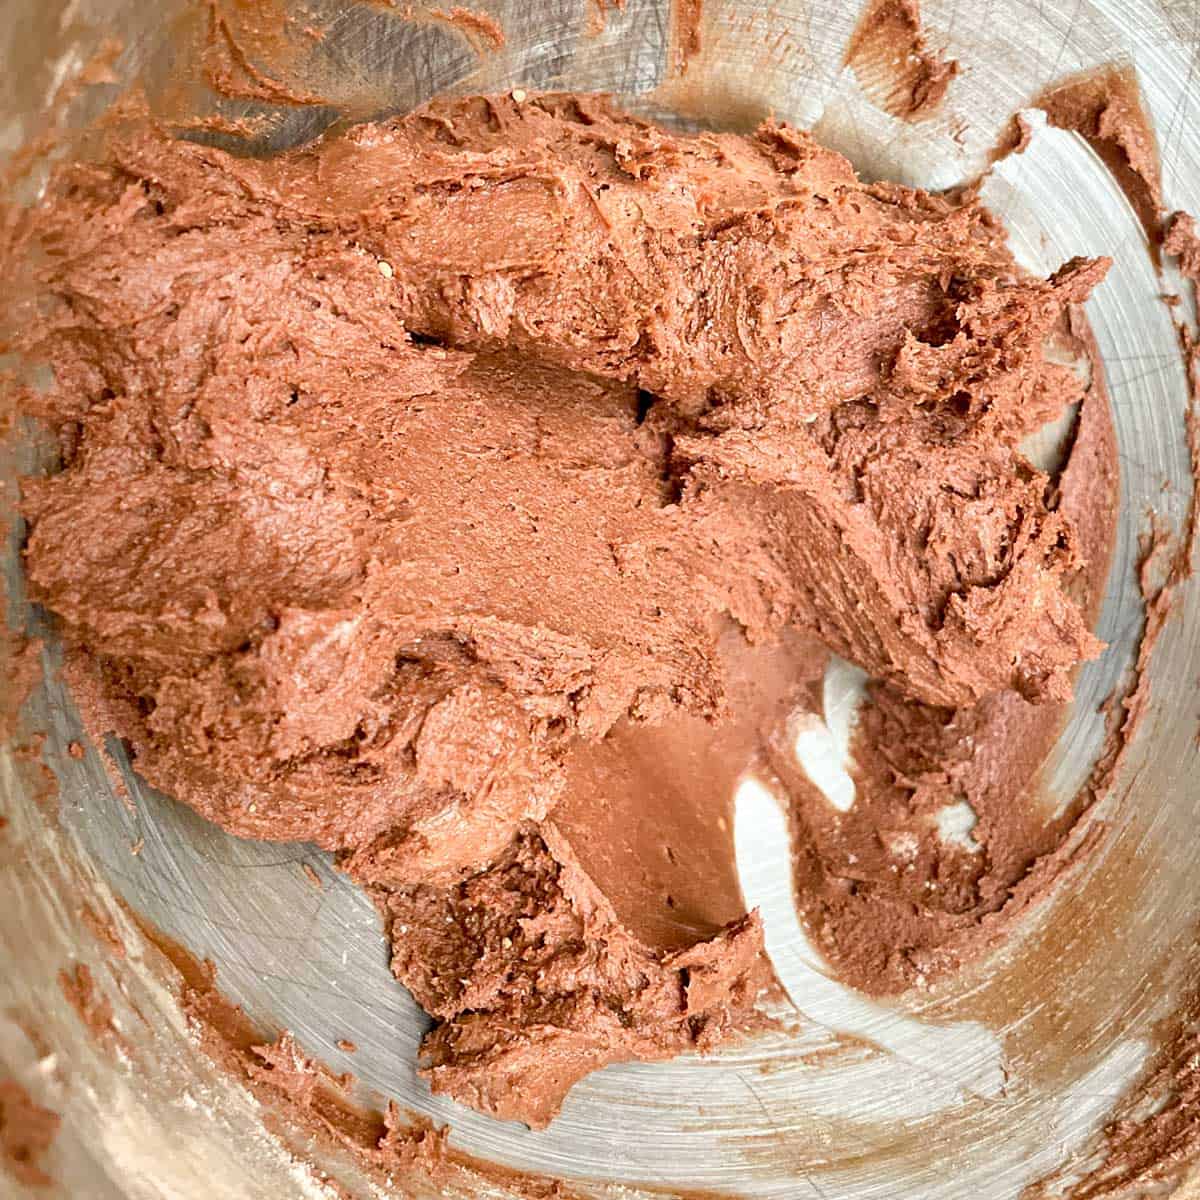 Chocolate cookie dough in a mixer bowl.